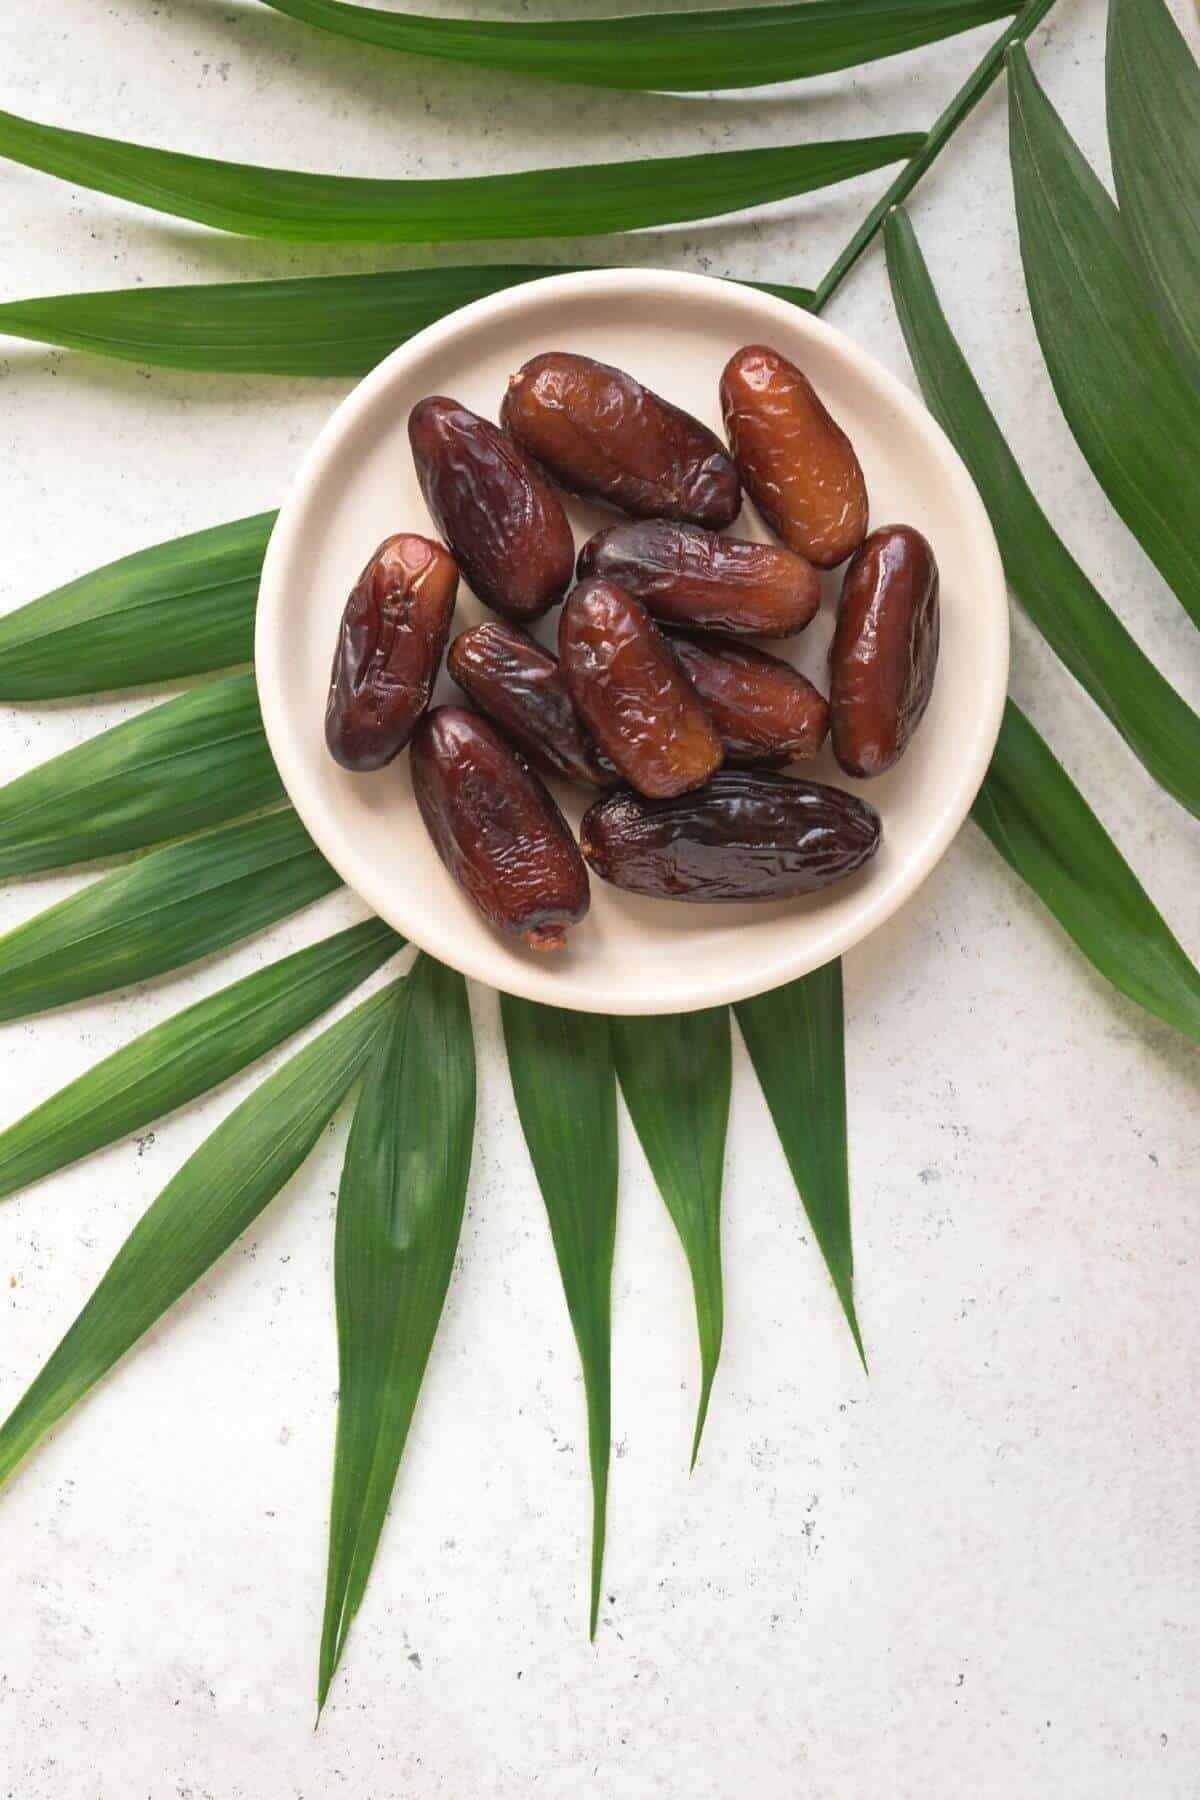 A small plate of fresh dates placed over a palm leaf.